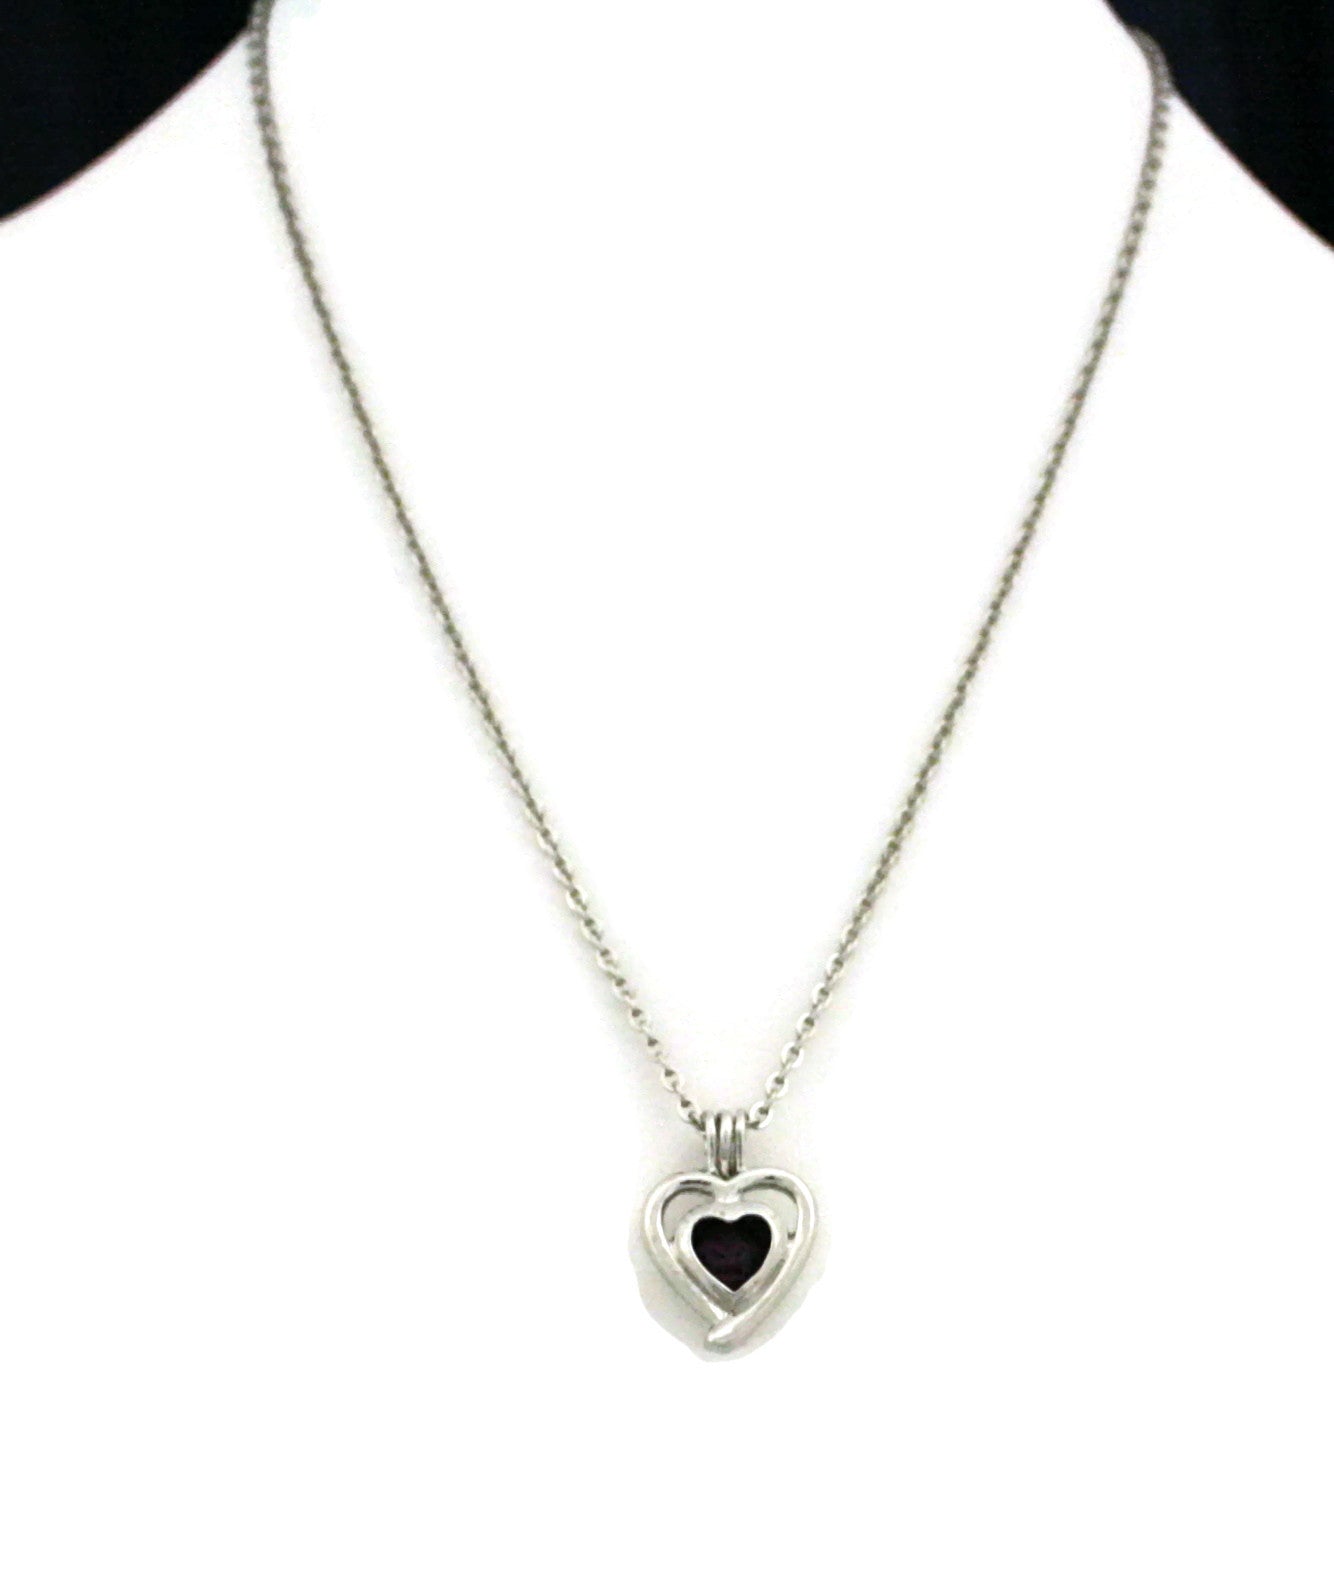 Beloved Silver Heart Essential Oil Diffuser Necklace- 18"- Cage Pendant-Diffuser Necklace-Destination Oils